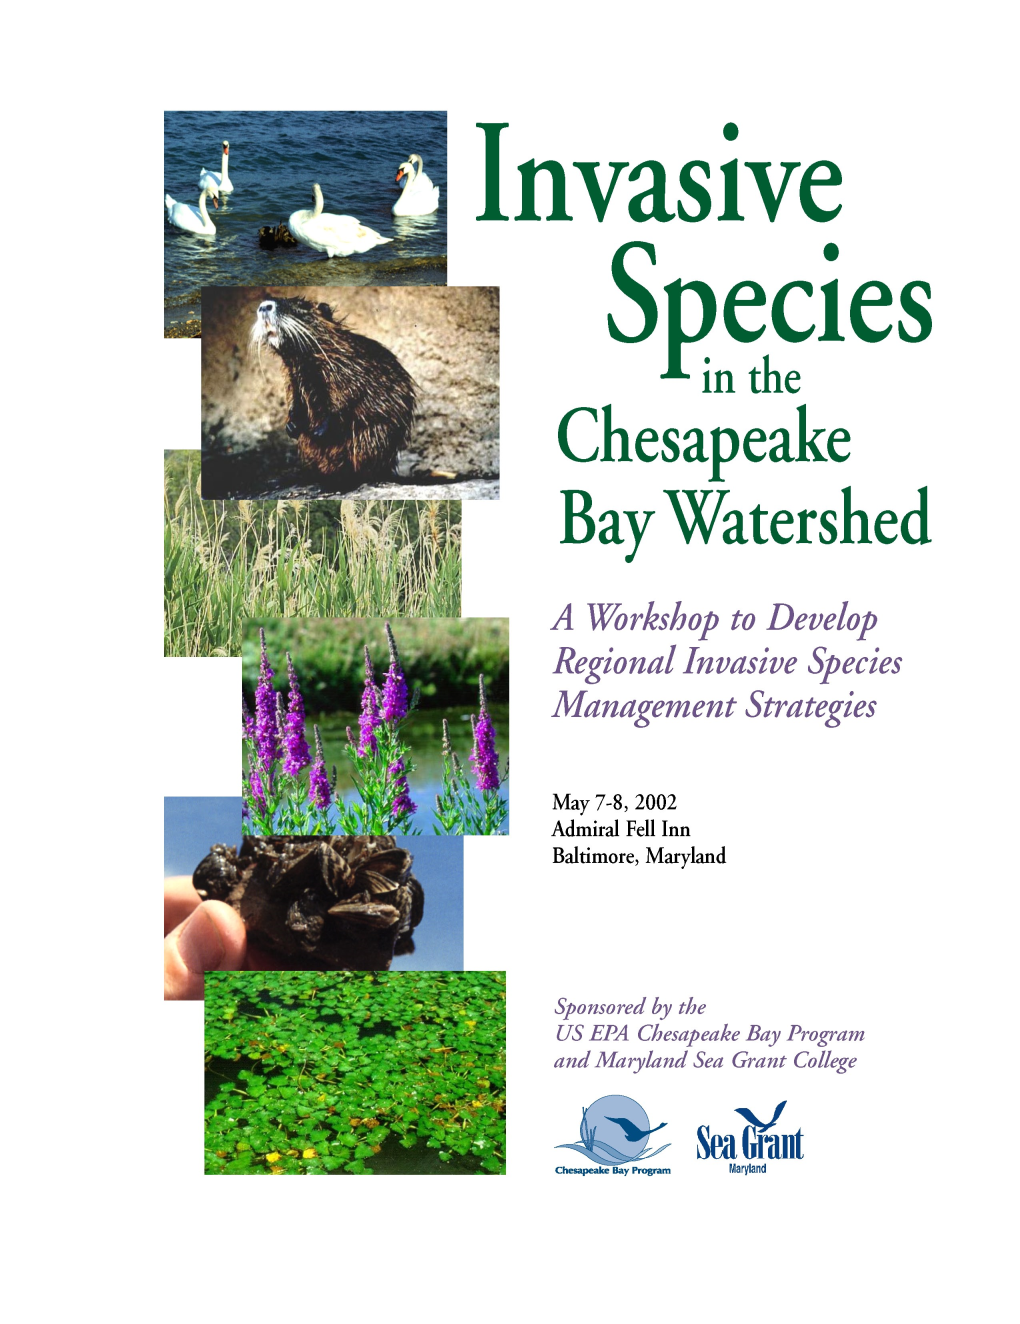 Invasive Species in the Chesapeake Bay Watershed